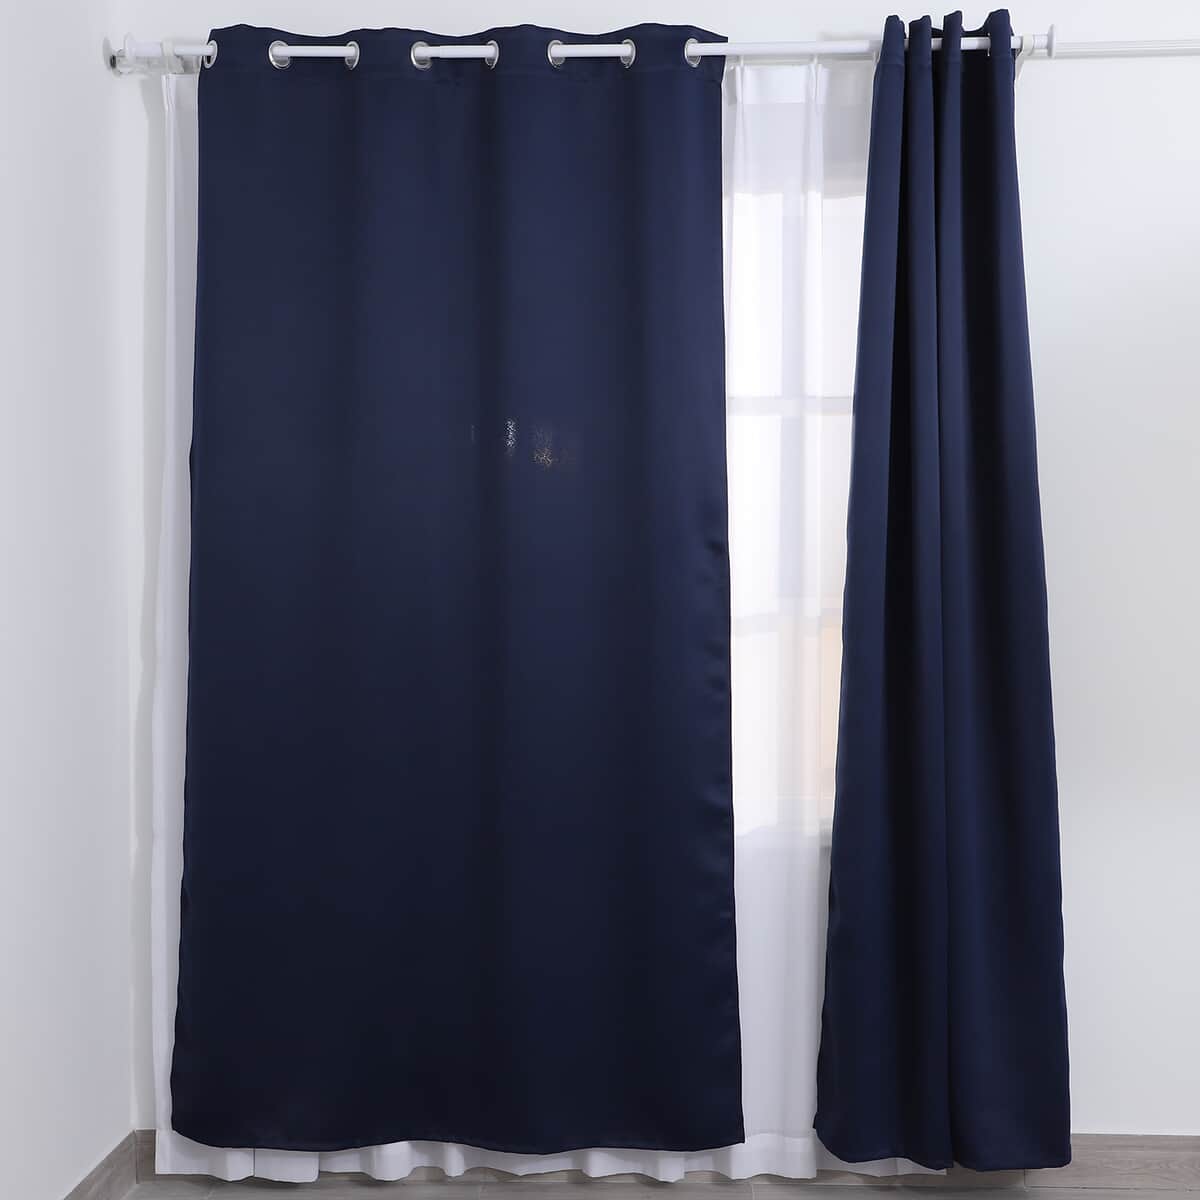 Set of 2 Navy Blue Solid Blackout Curtain with 8 Metal Rings image number 1